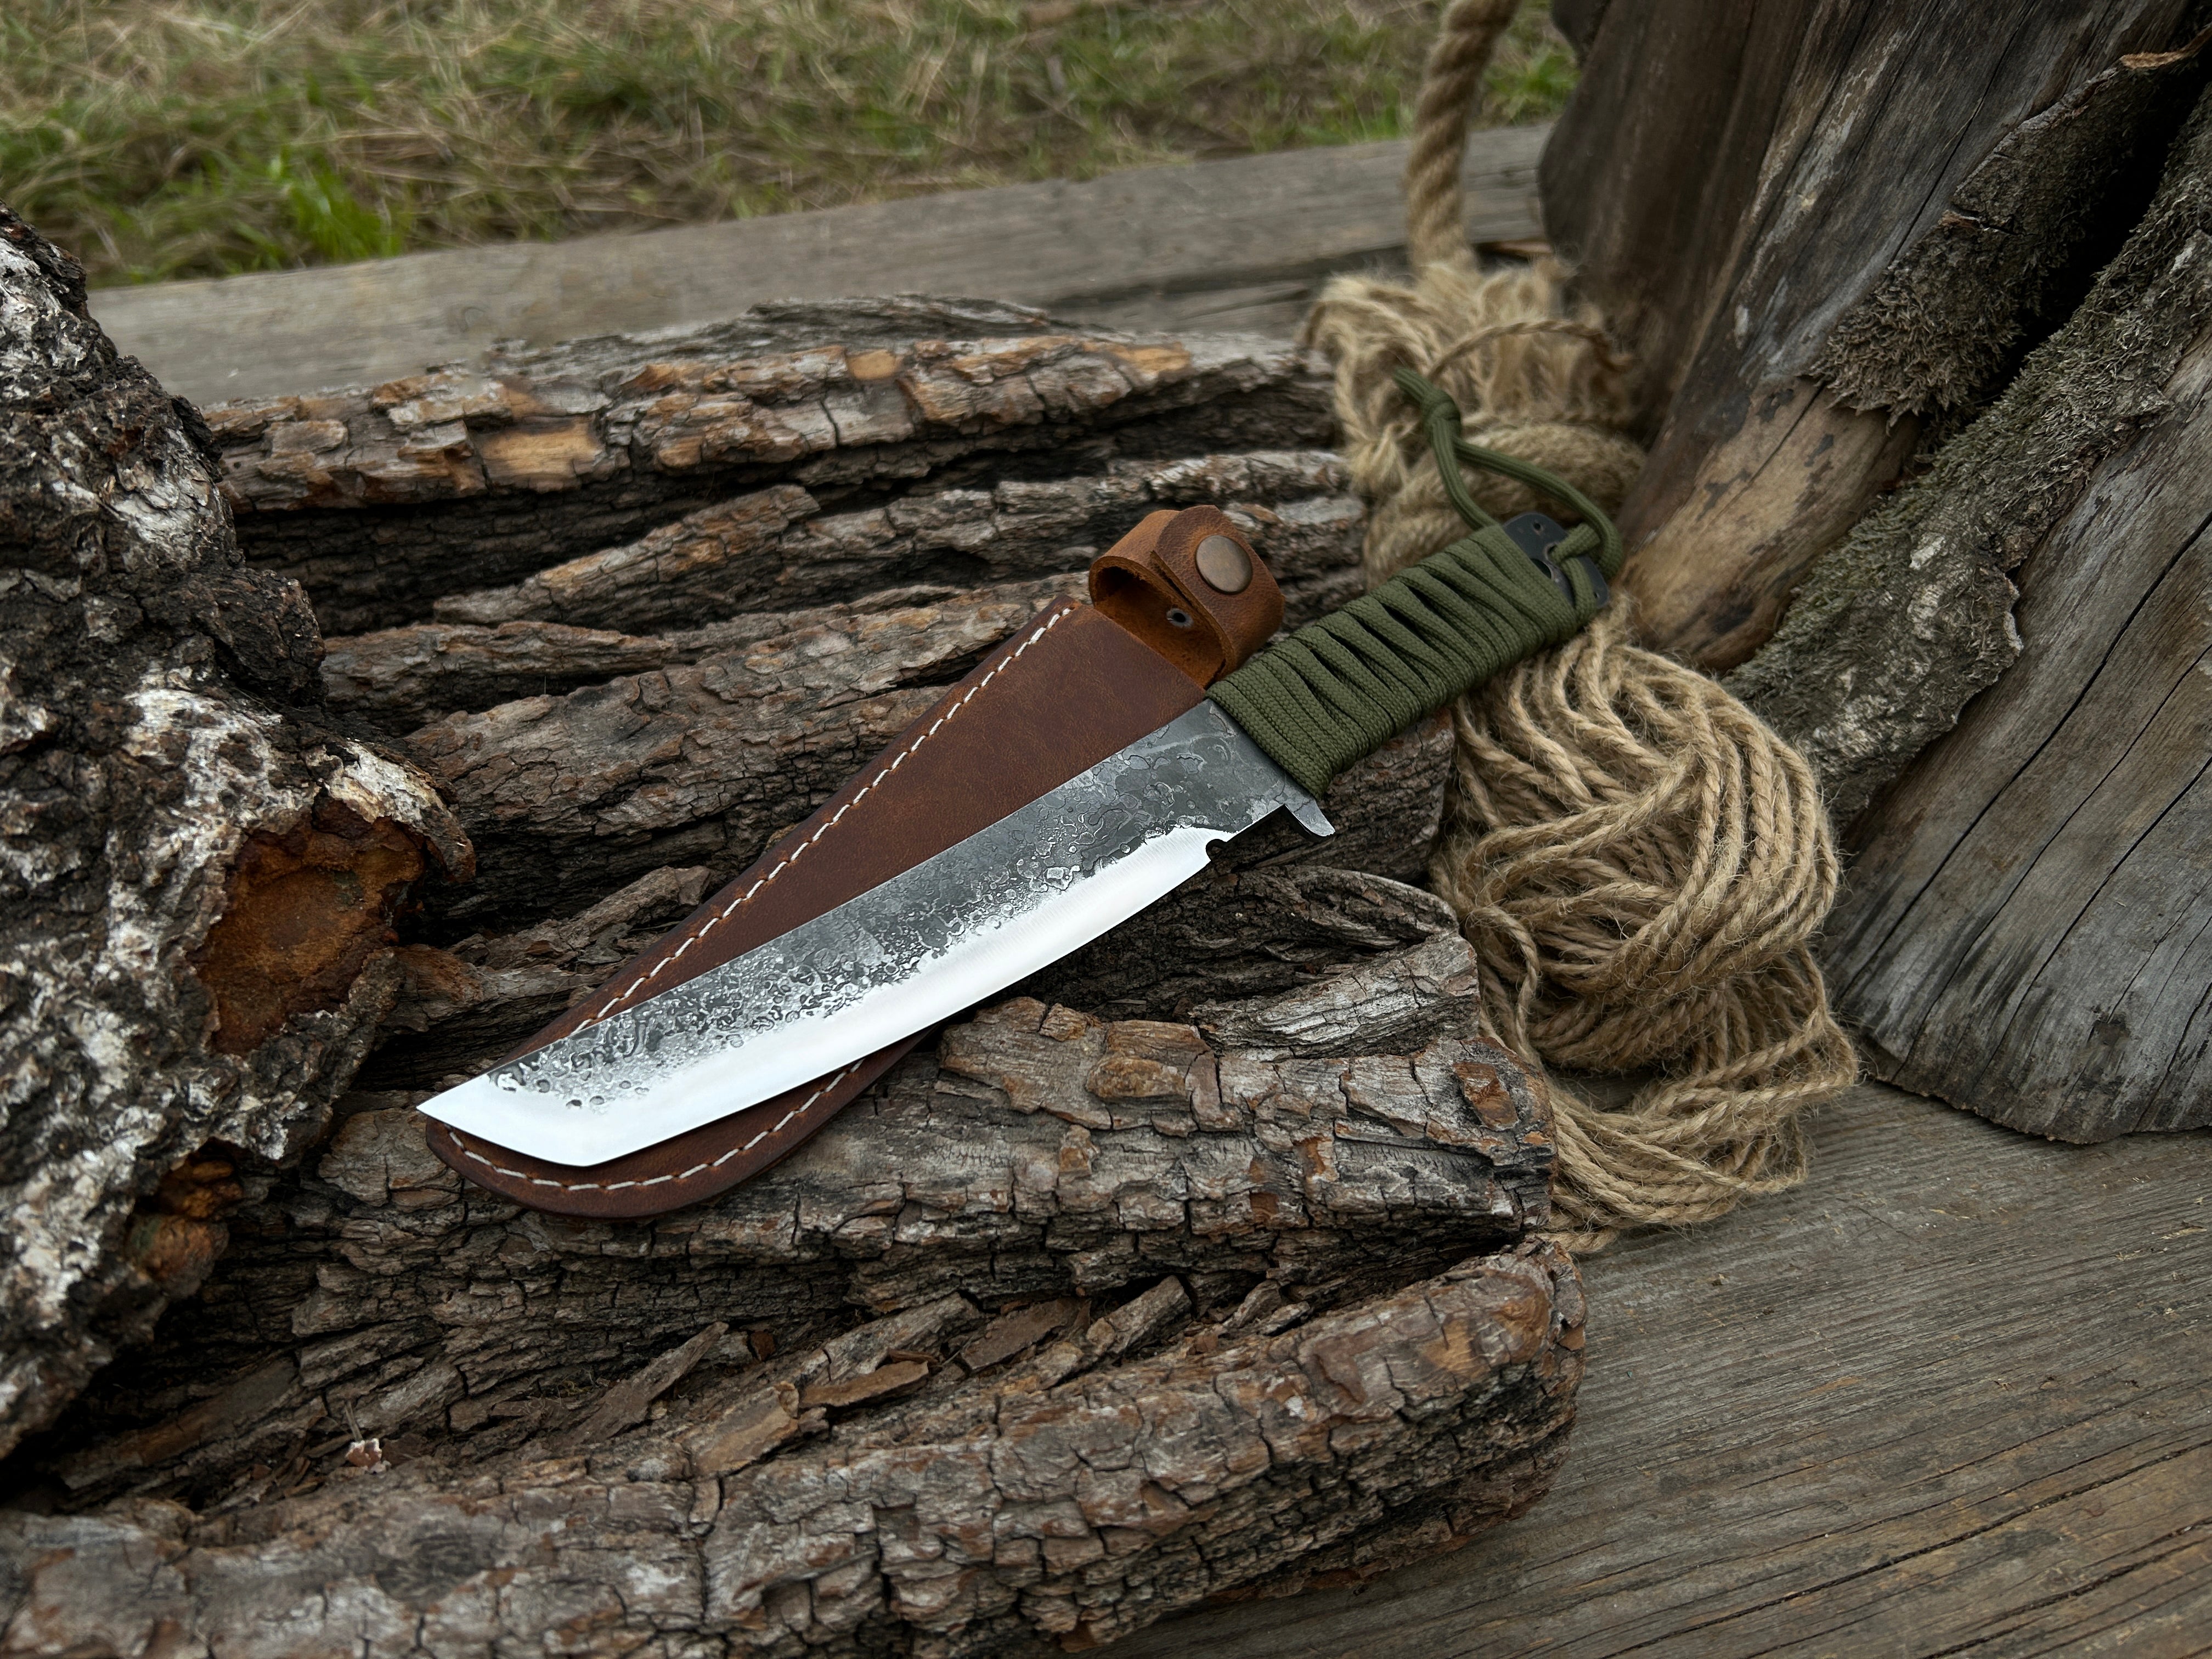 Hand-Forged Throwing Knife, Total Length - 24.5 cm (9.6 inches)